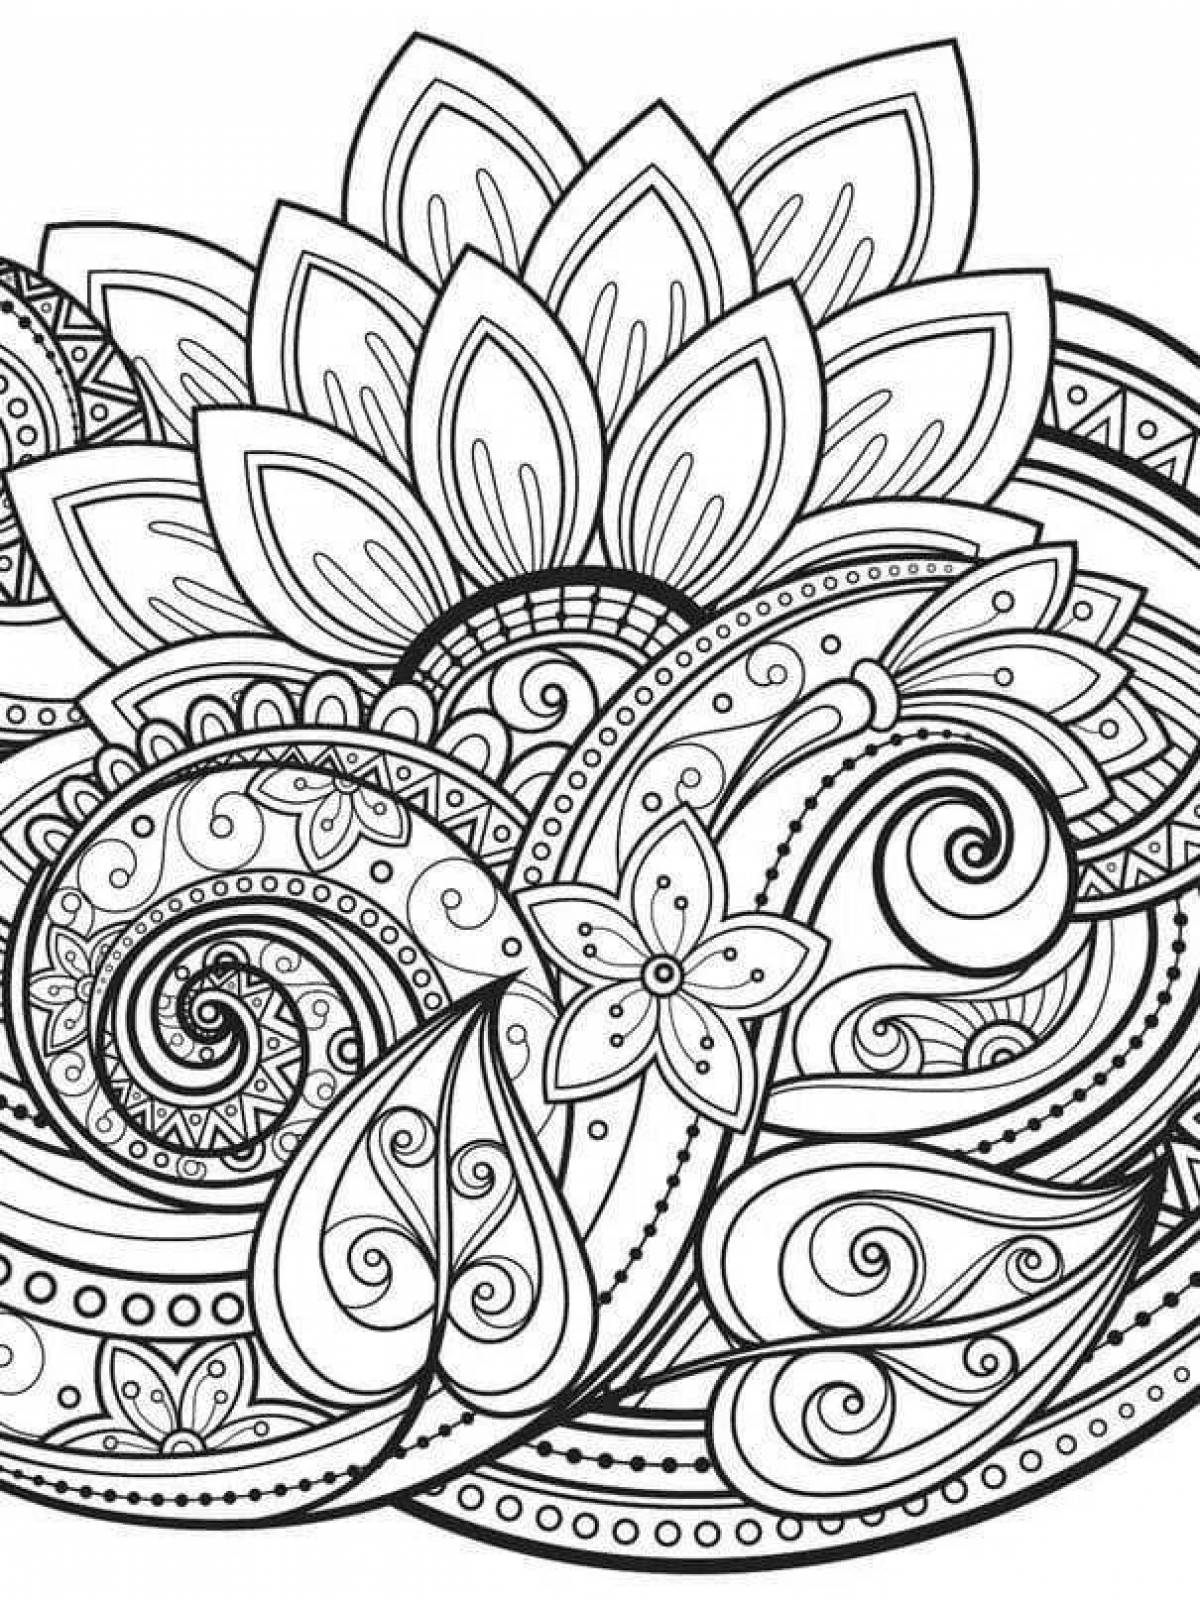 Adorable patterns and ornaments for coloring